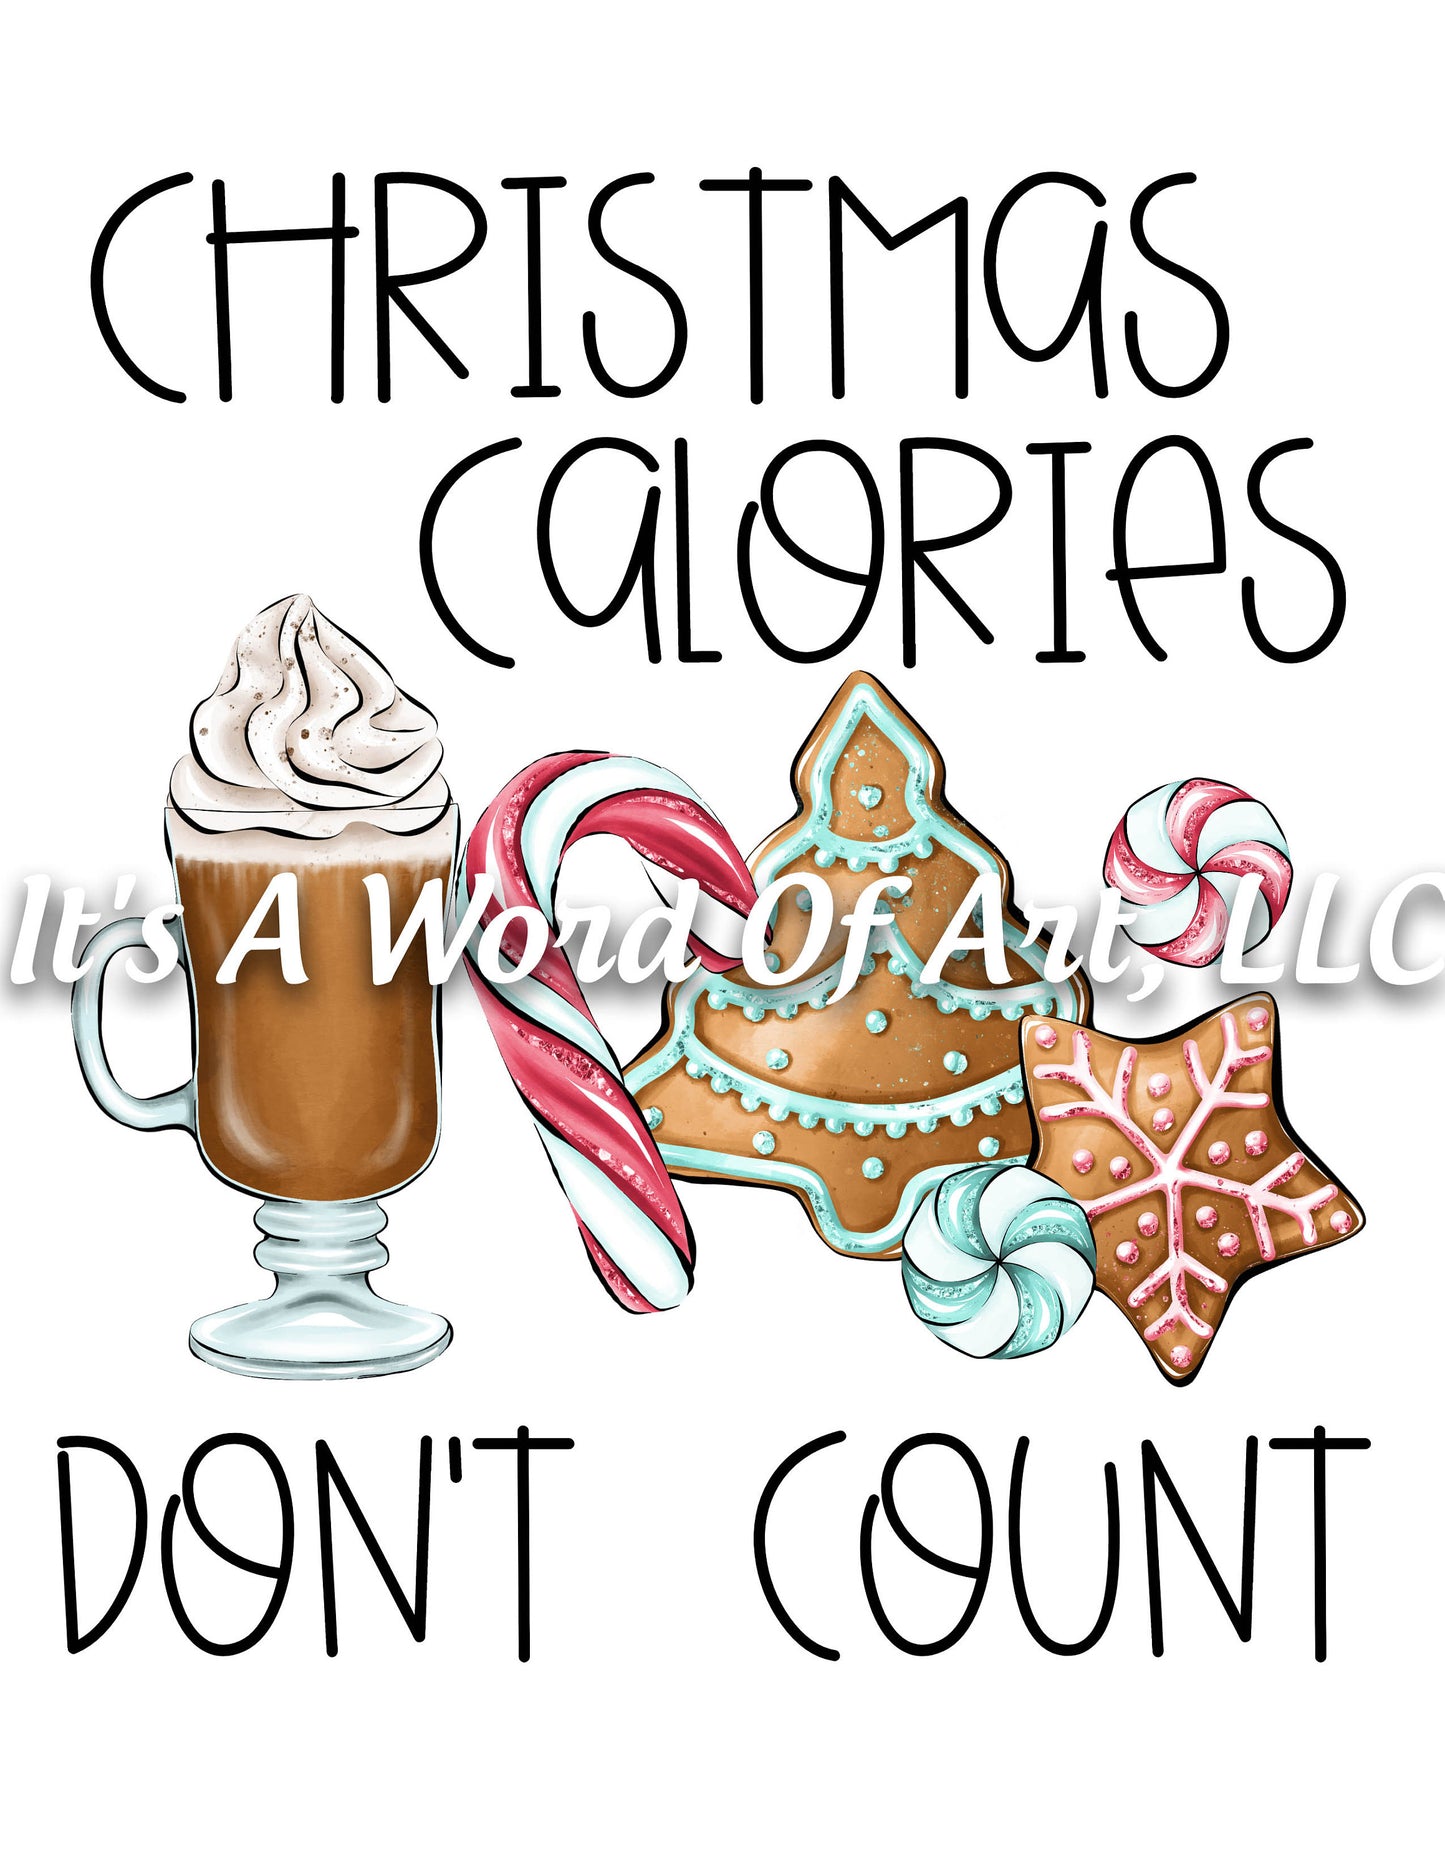 Christmas 191 - Christmas Calories Don't Count Cookies - Sublimation Transfer Set/Ready To Press Sublimation Transfer/Sublimation Transfer